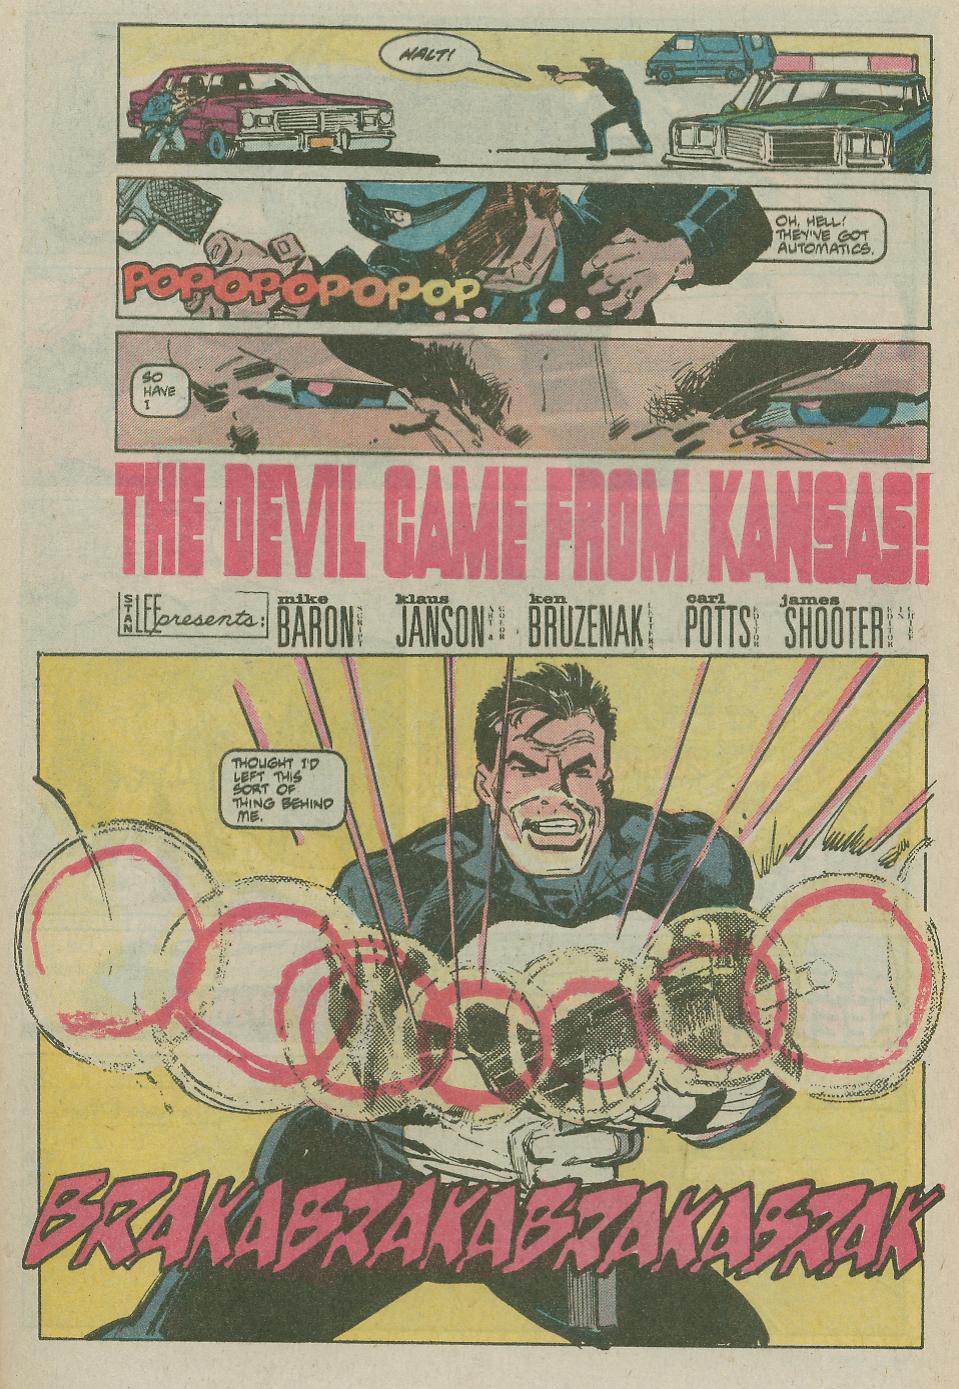 Read online The Punisher (1987) comic -  Issue #3 - The Devil Came from Kansas! - 4